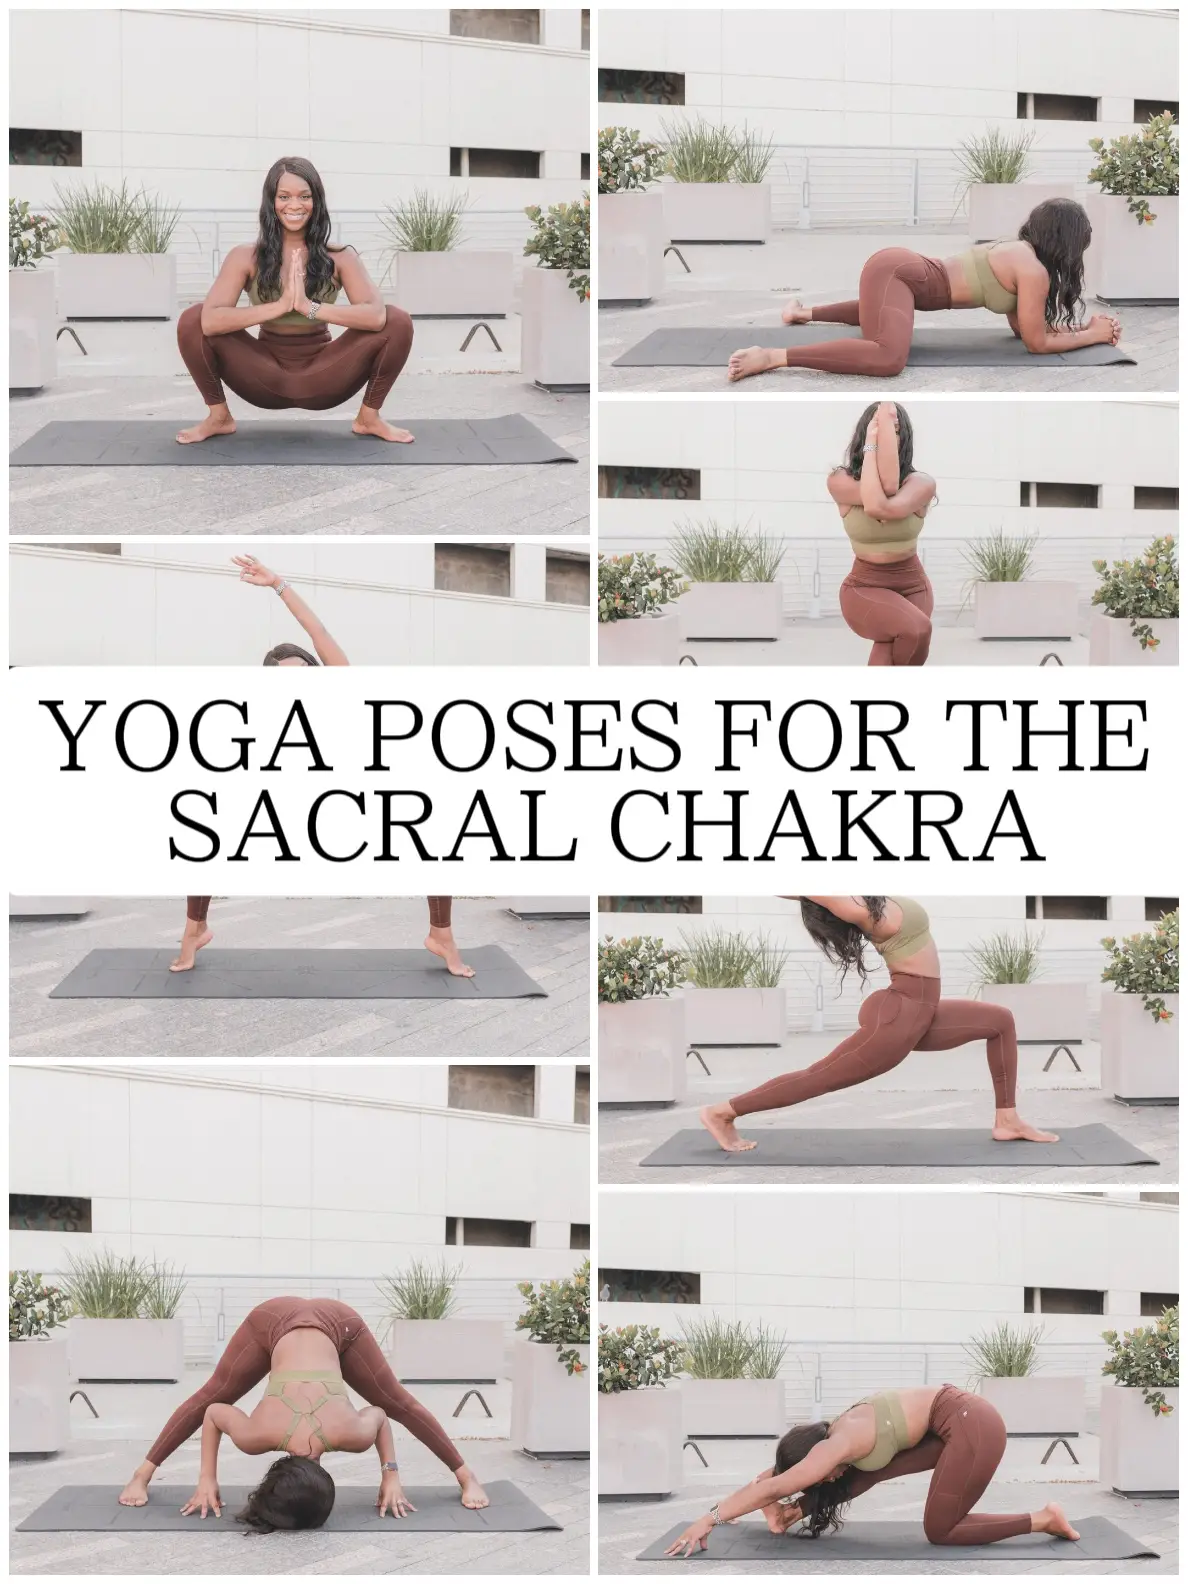 Yoga Poses For The Sacral Chakra, Gallery posted by Margo Francois